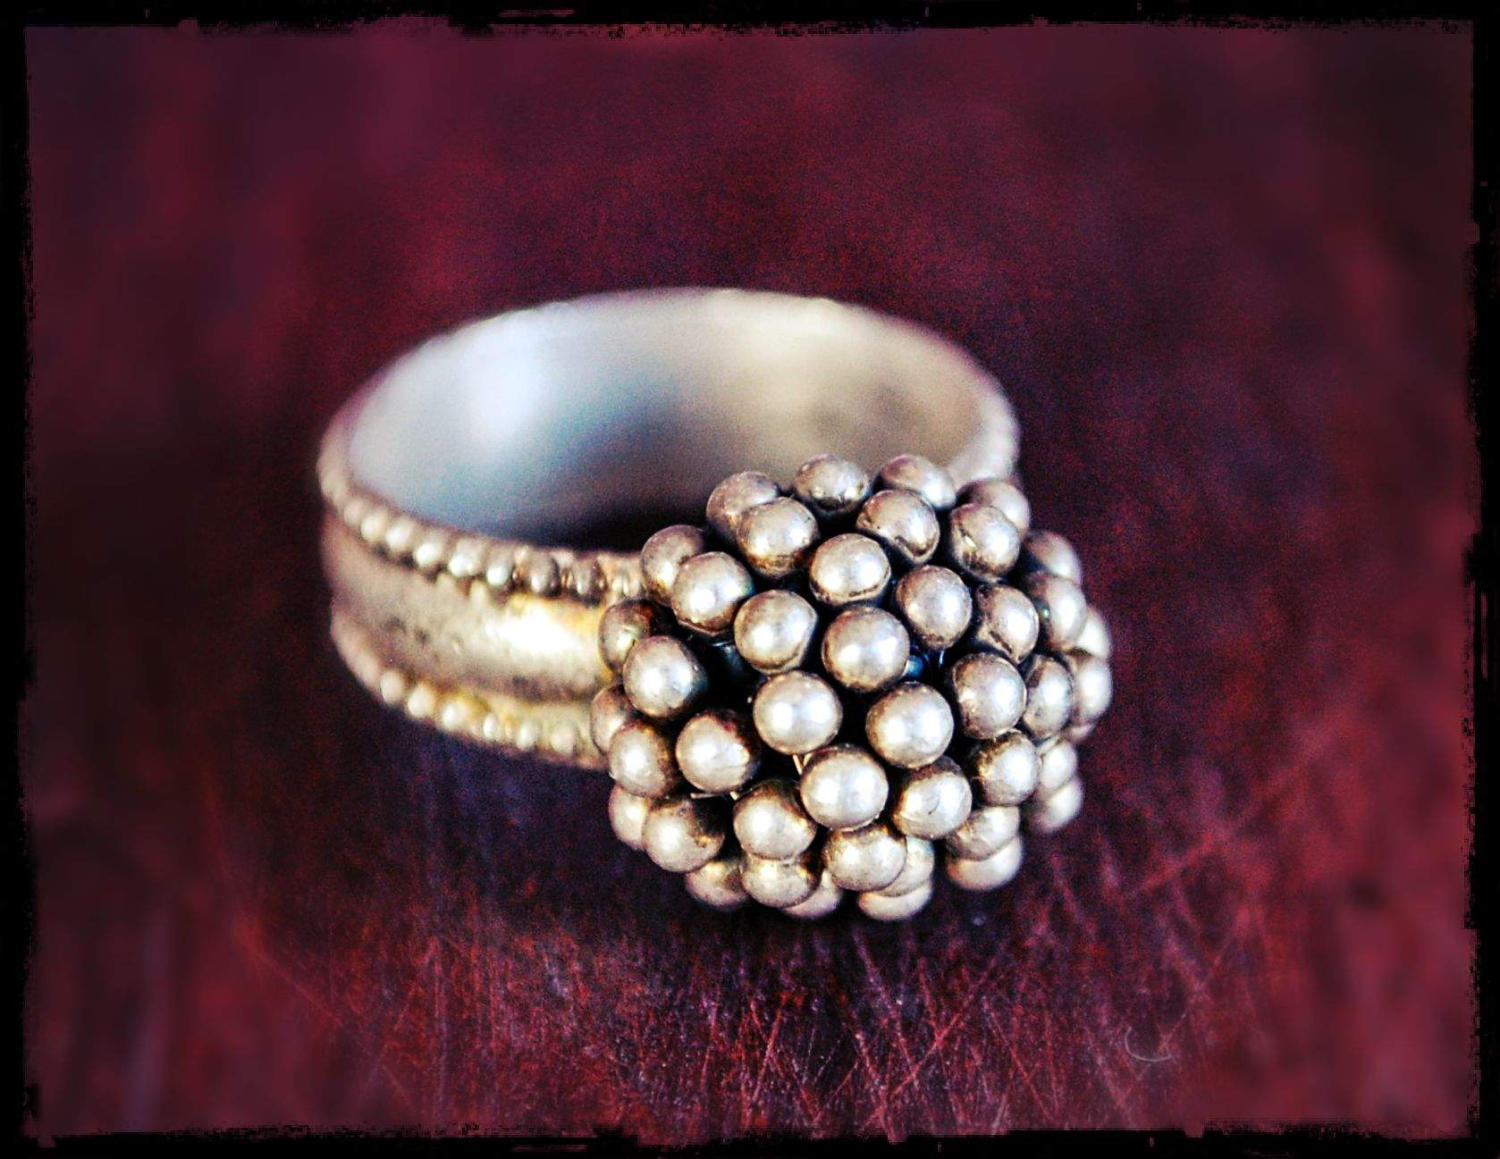 Tribal Rajasthan Silver Ring with Bells- Size 7 - Ethnic Tribal Indian Silver Ring - Rajasthani Silver Ring